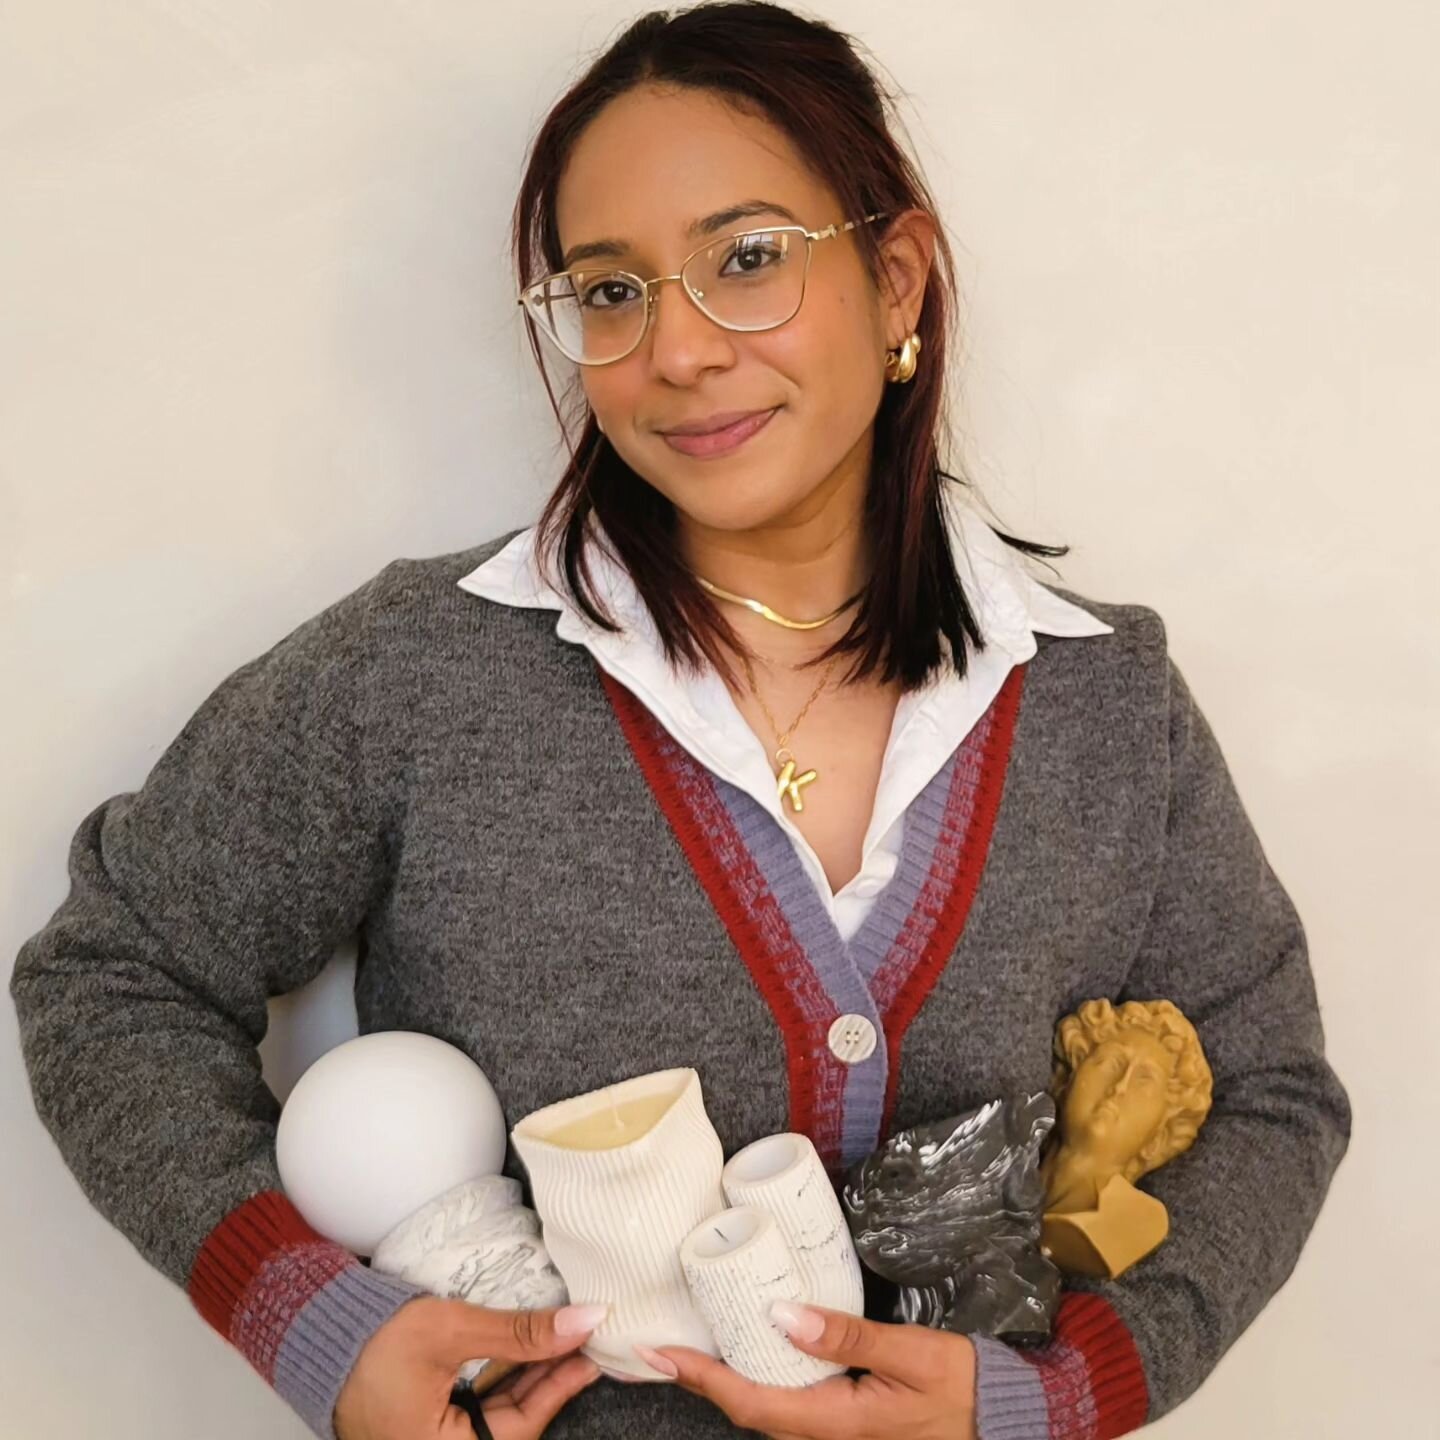 Owner of S&amp;H Keslie is pictured with her favorite pieces. All that's missing is the classic Teddy candle (he's off at college 😔)

&quot;I'm four years in, and every piece I pull out of a mold, or every whiff of my candle recipes and I still get 